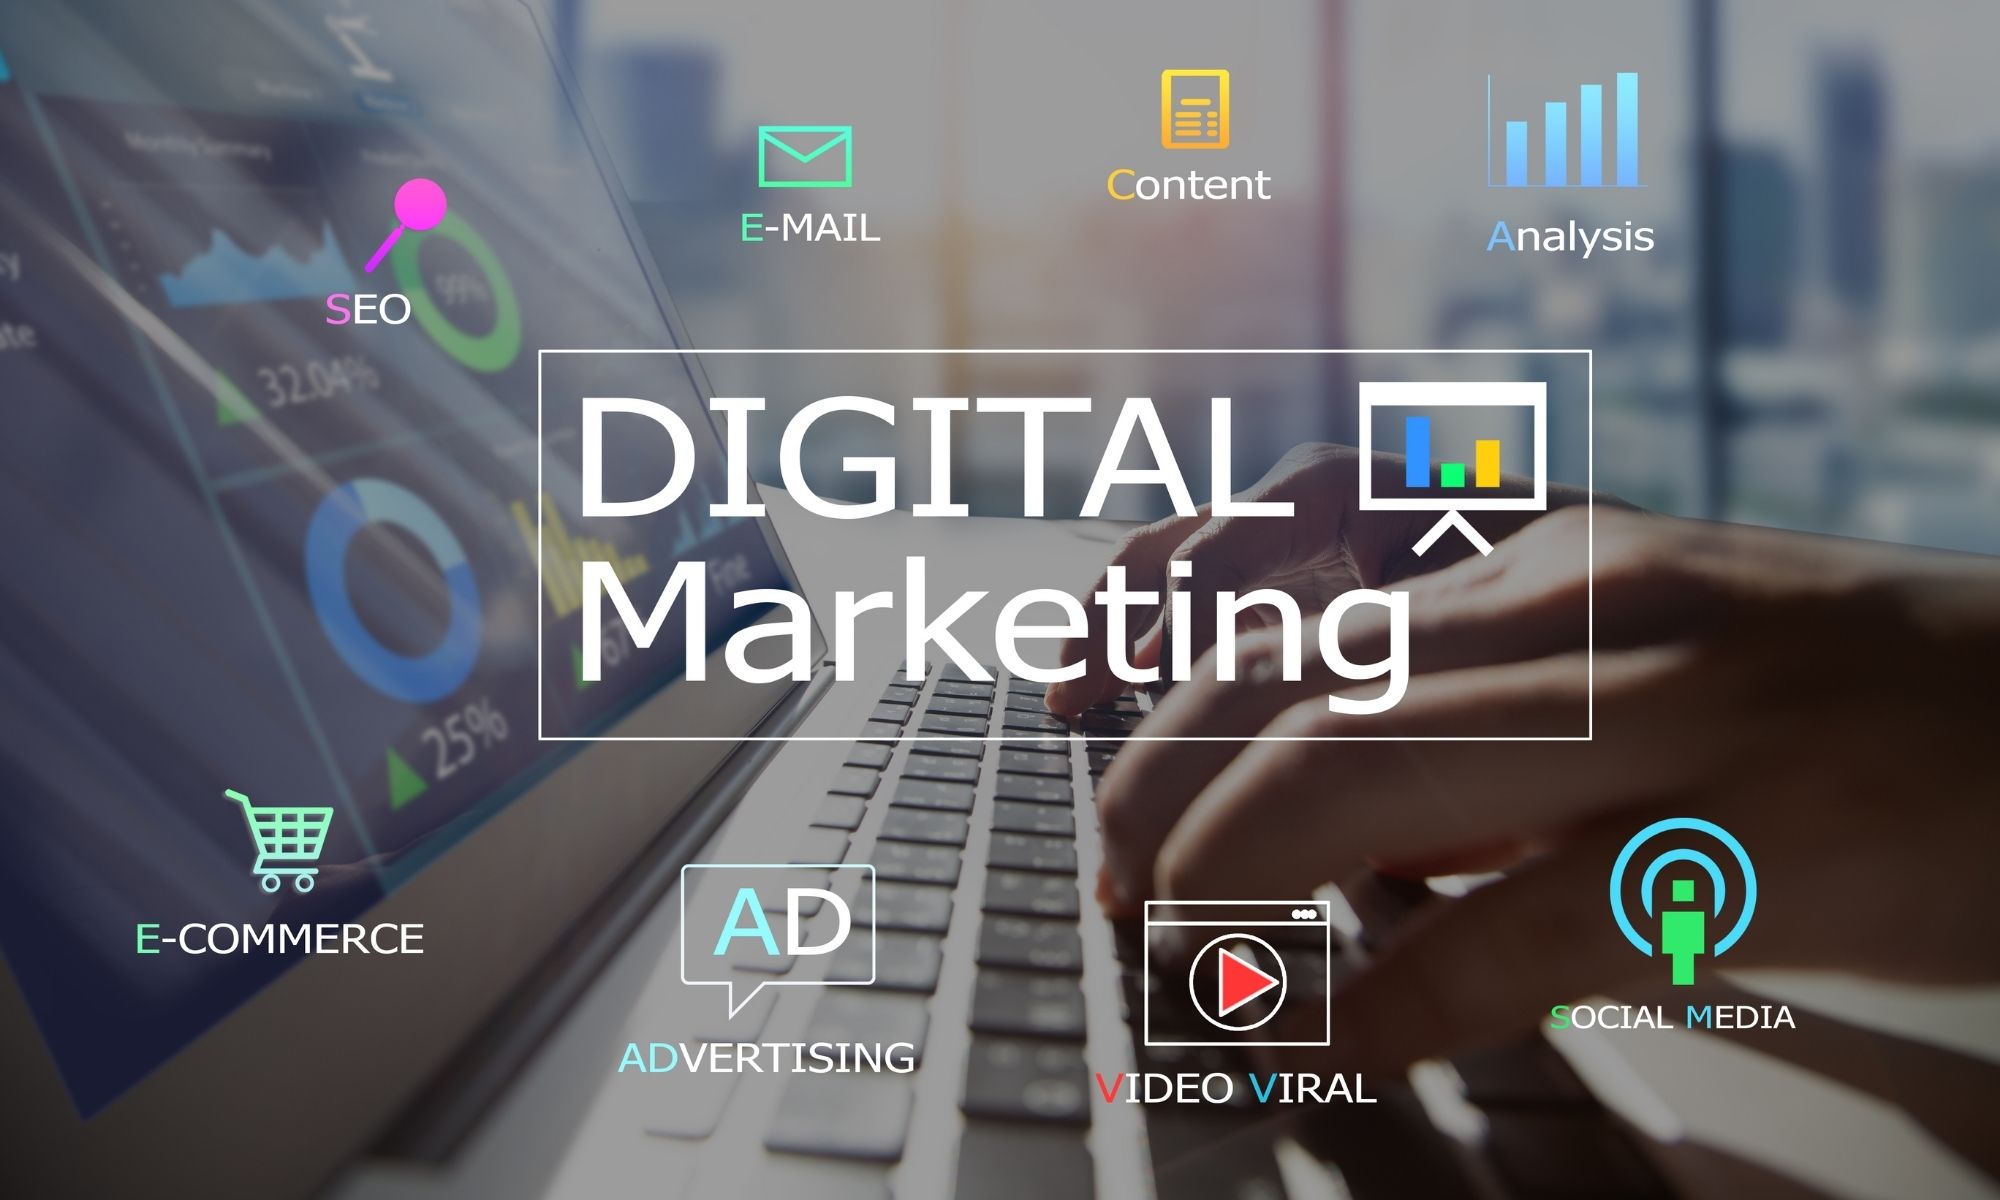 10 Things You Should Change About Your Digital Marketing Strategy